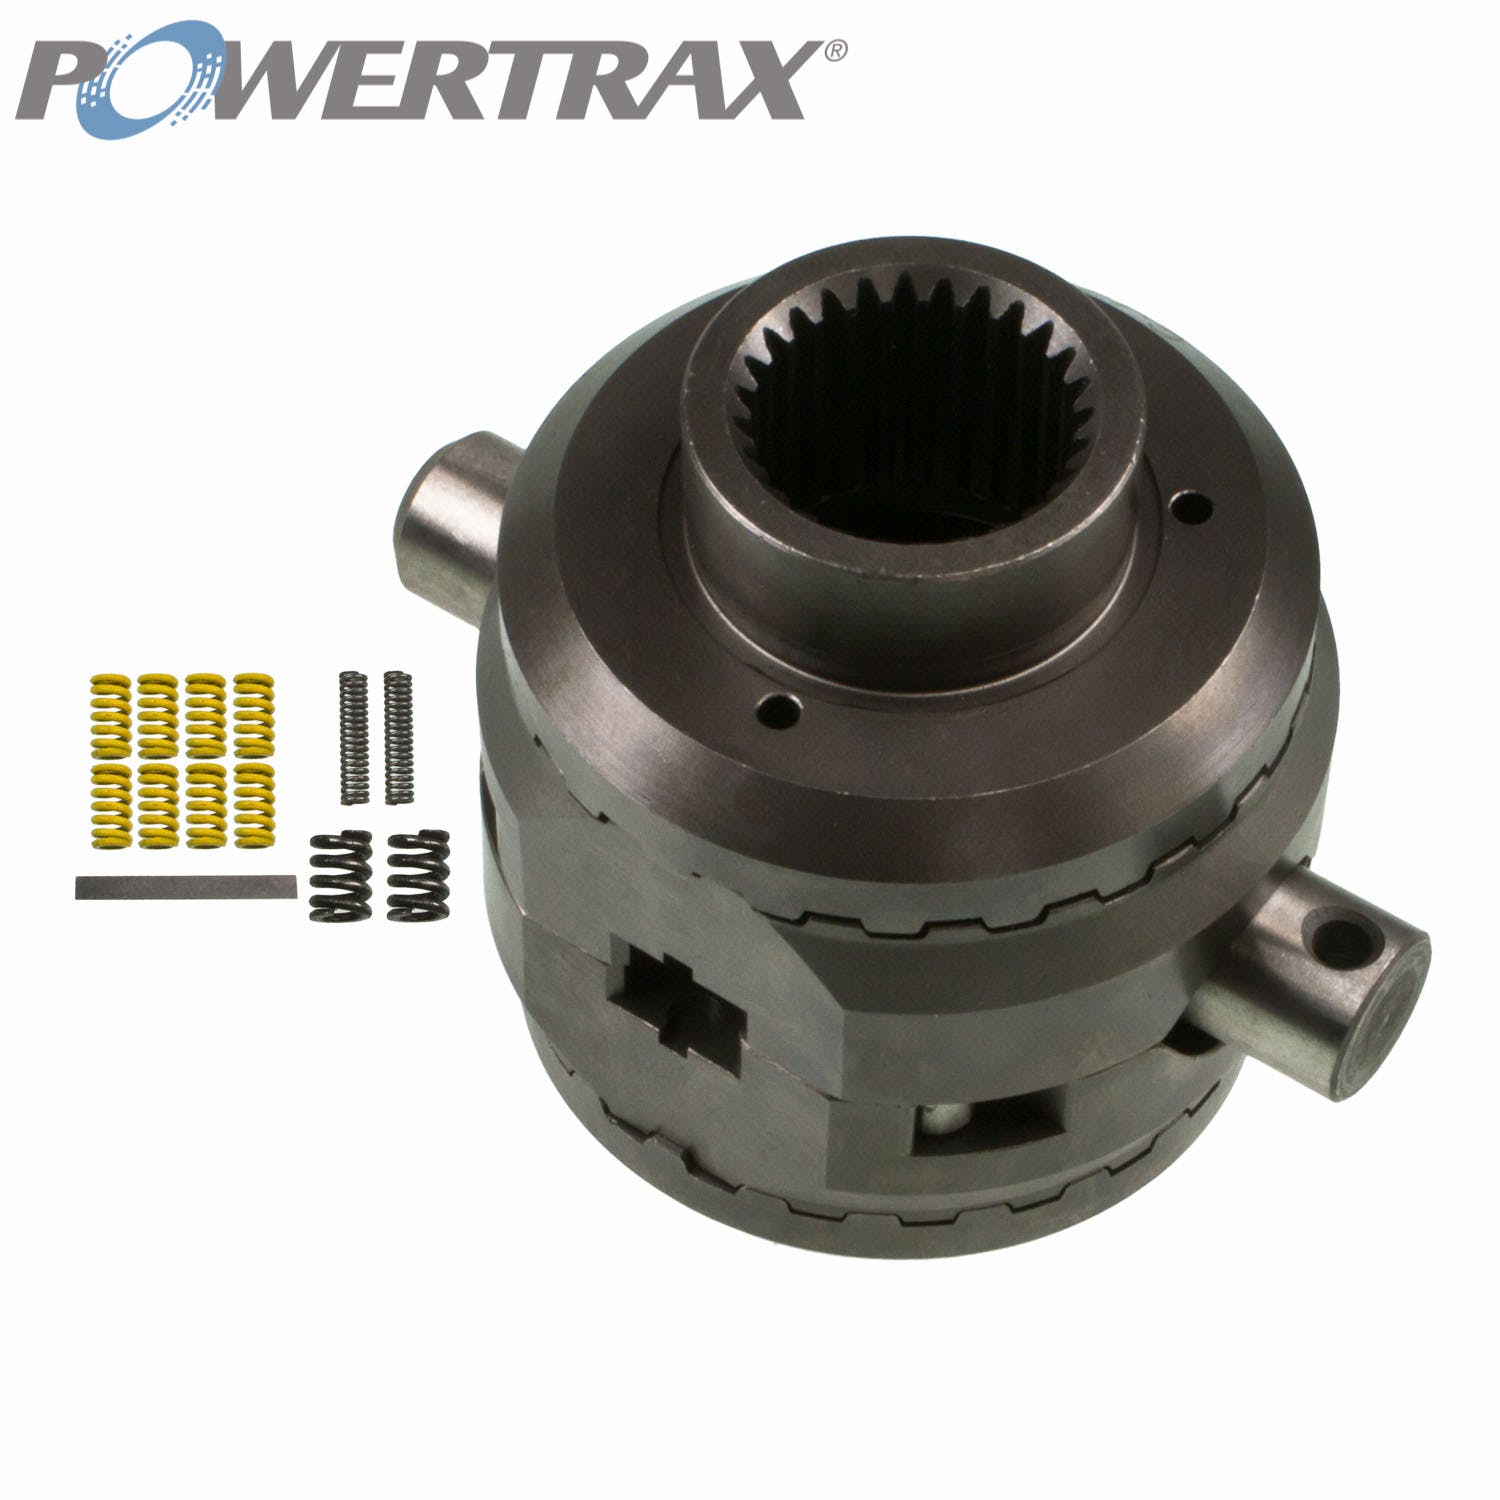 PowerTrax 9204352706 No-Slip Traction System